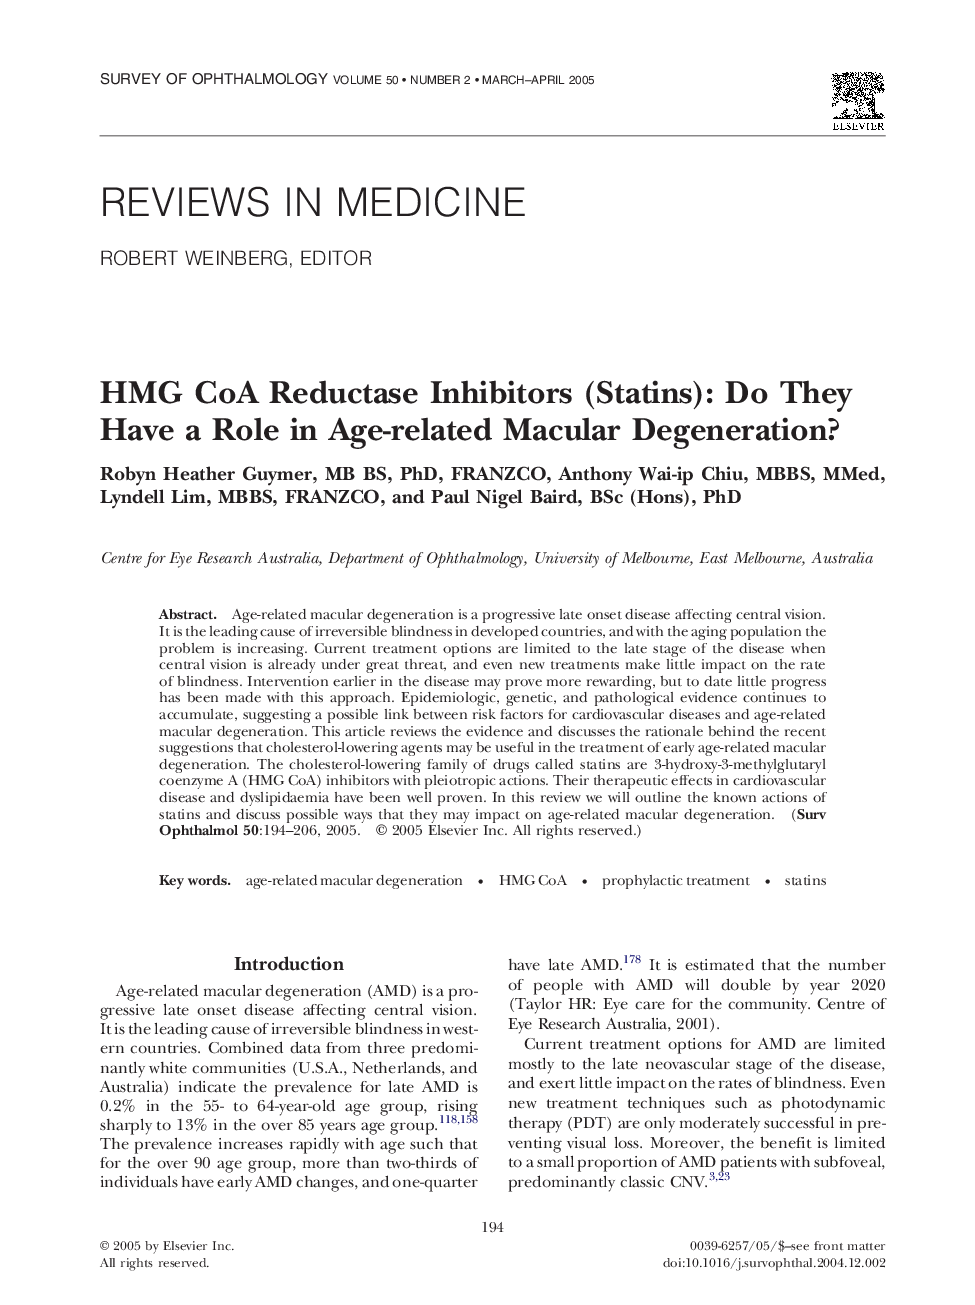 HMG CoA Reductase Inhibitors (Statins): Do They Have a Role in Age-related Macular Degeneration?